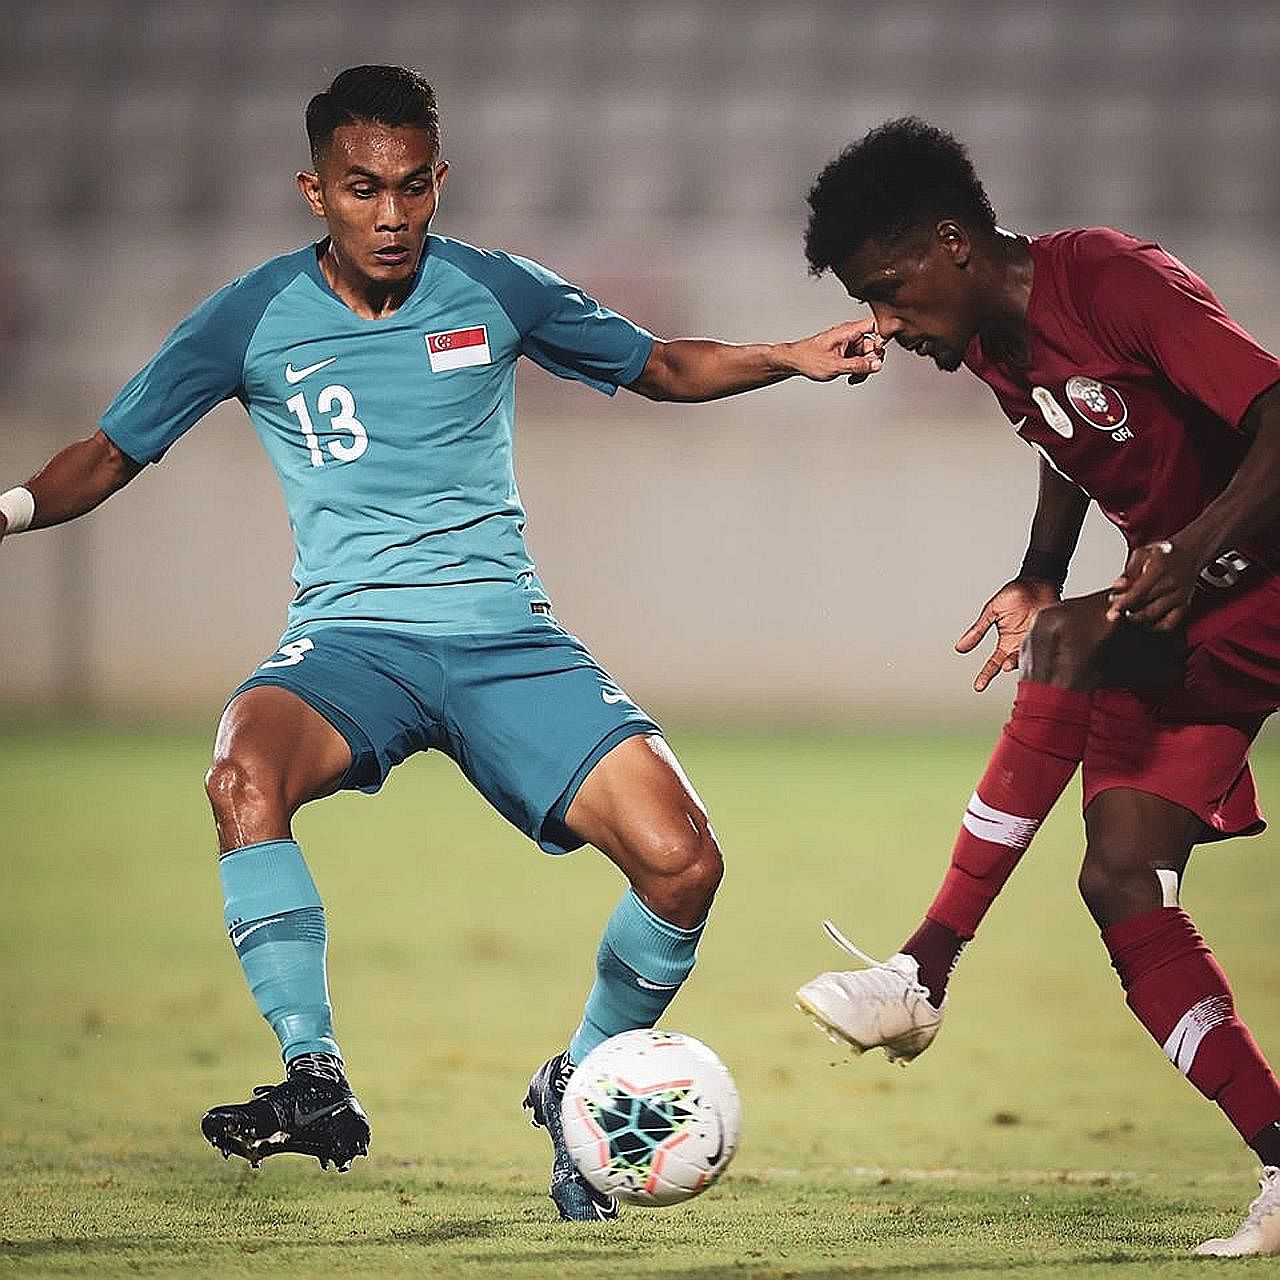 Hafiz Nor marking a Qatari player in last Thursday's 2-0 friendly loss in Doha. He is in line for his third straight Lions start against Yemen today. PHOTO: QATAR FA